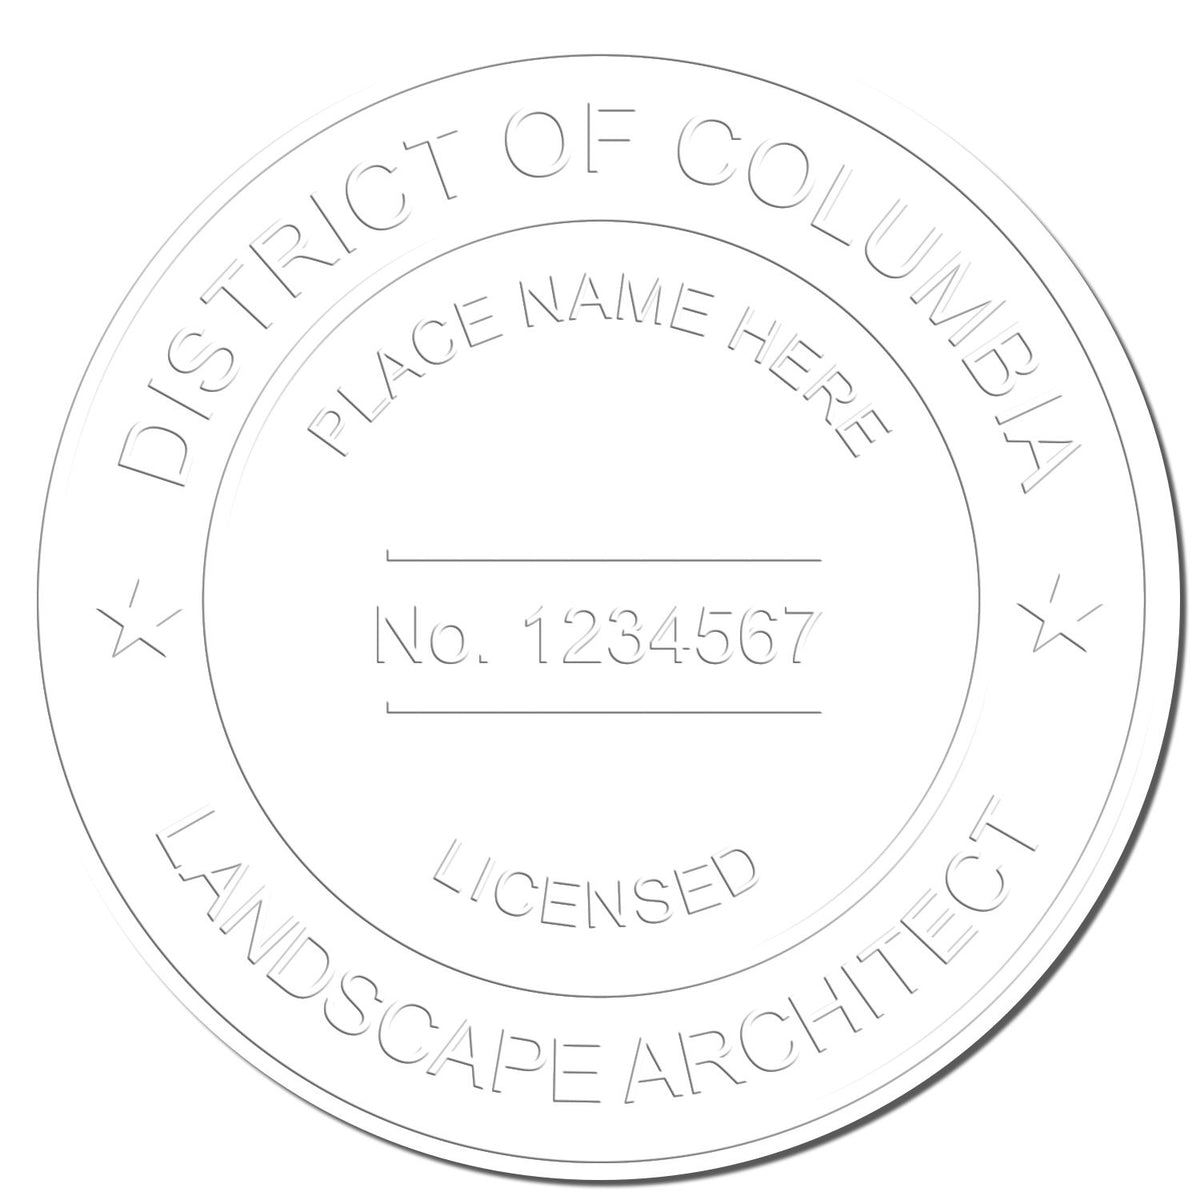 This paper is stamped with a sample imprint of the Hybrid District of Columbia Landscape Architect Seal, signifying its quality and reliability.